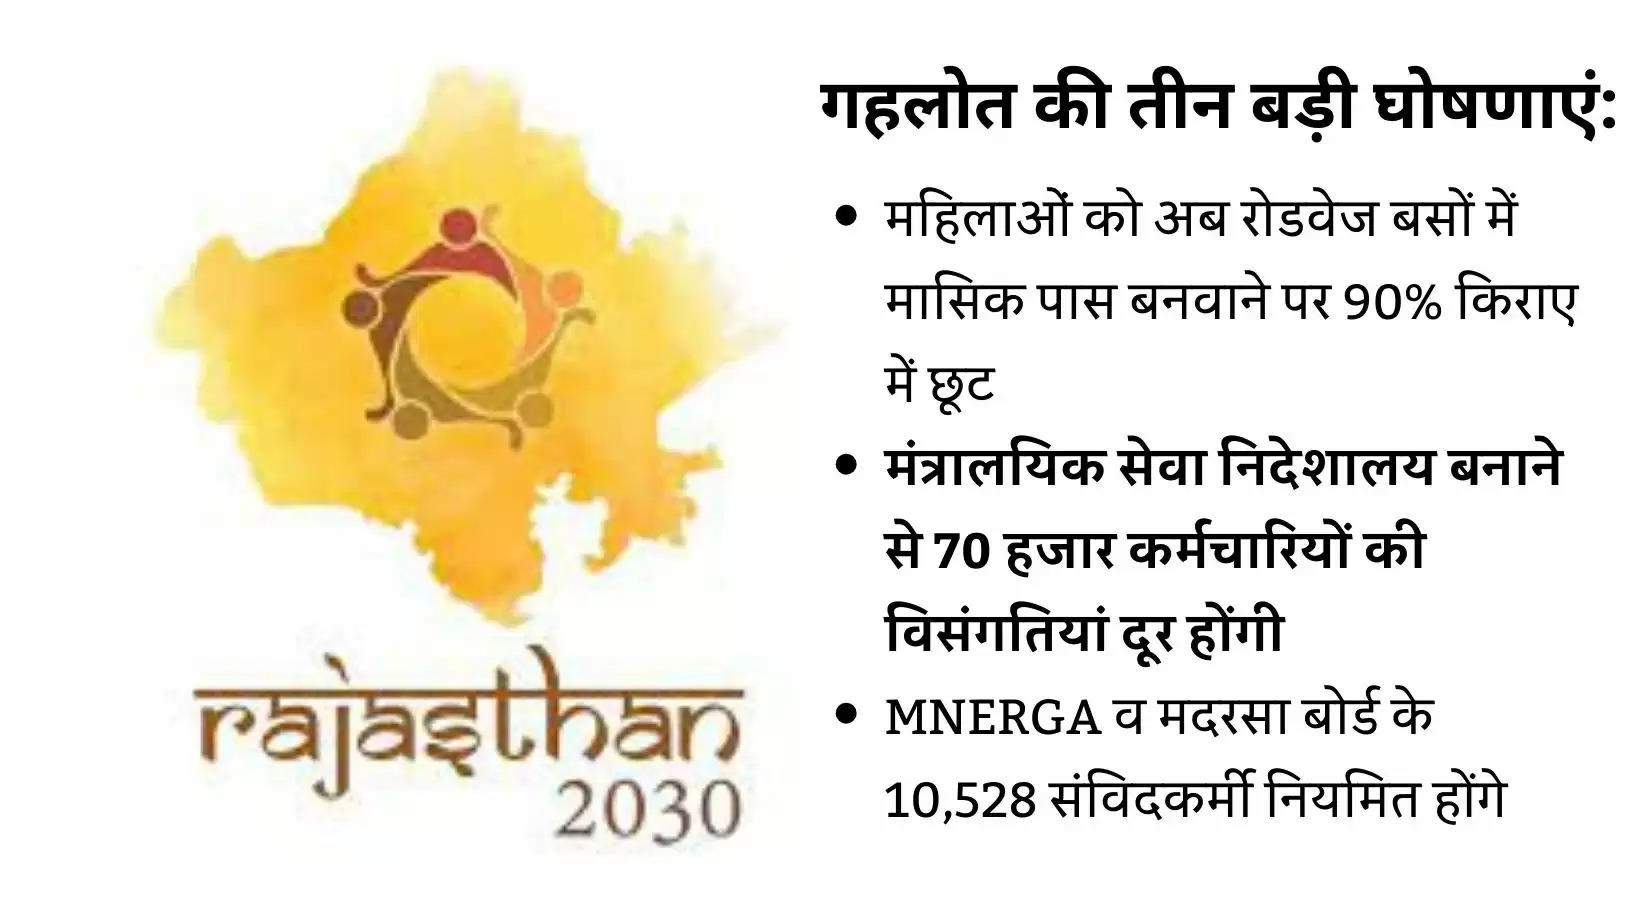 90% Discount on Monthly Roadways pass for Women, CM Gehlot Announces rajasthan Mission 2030 Vision 2030